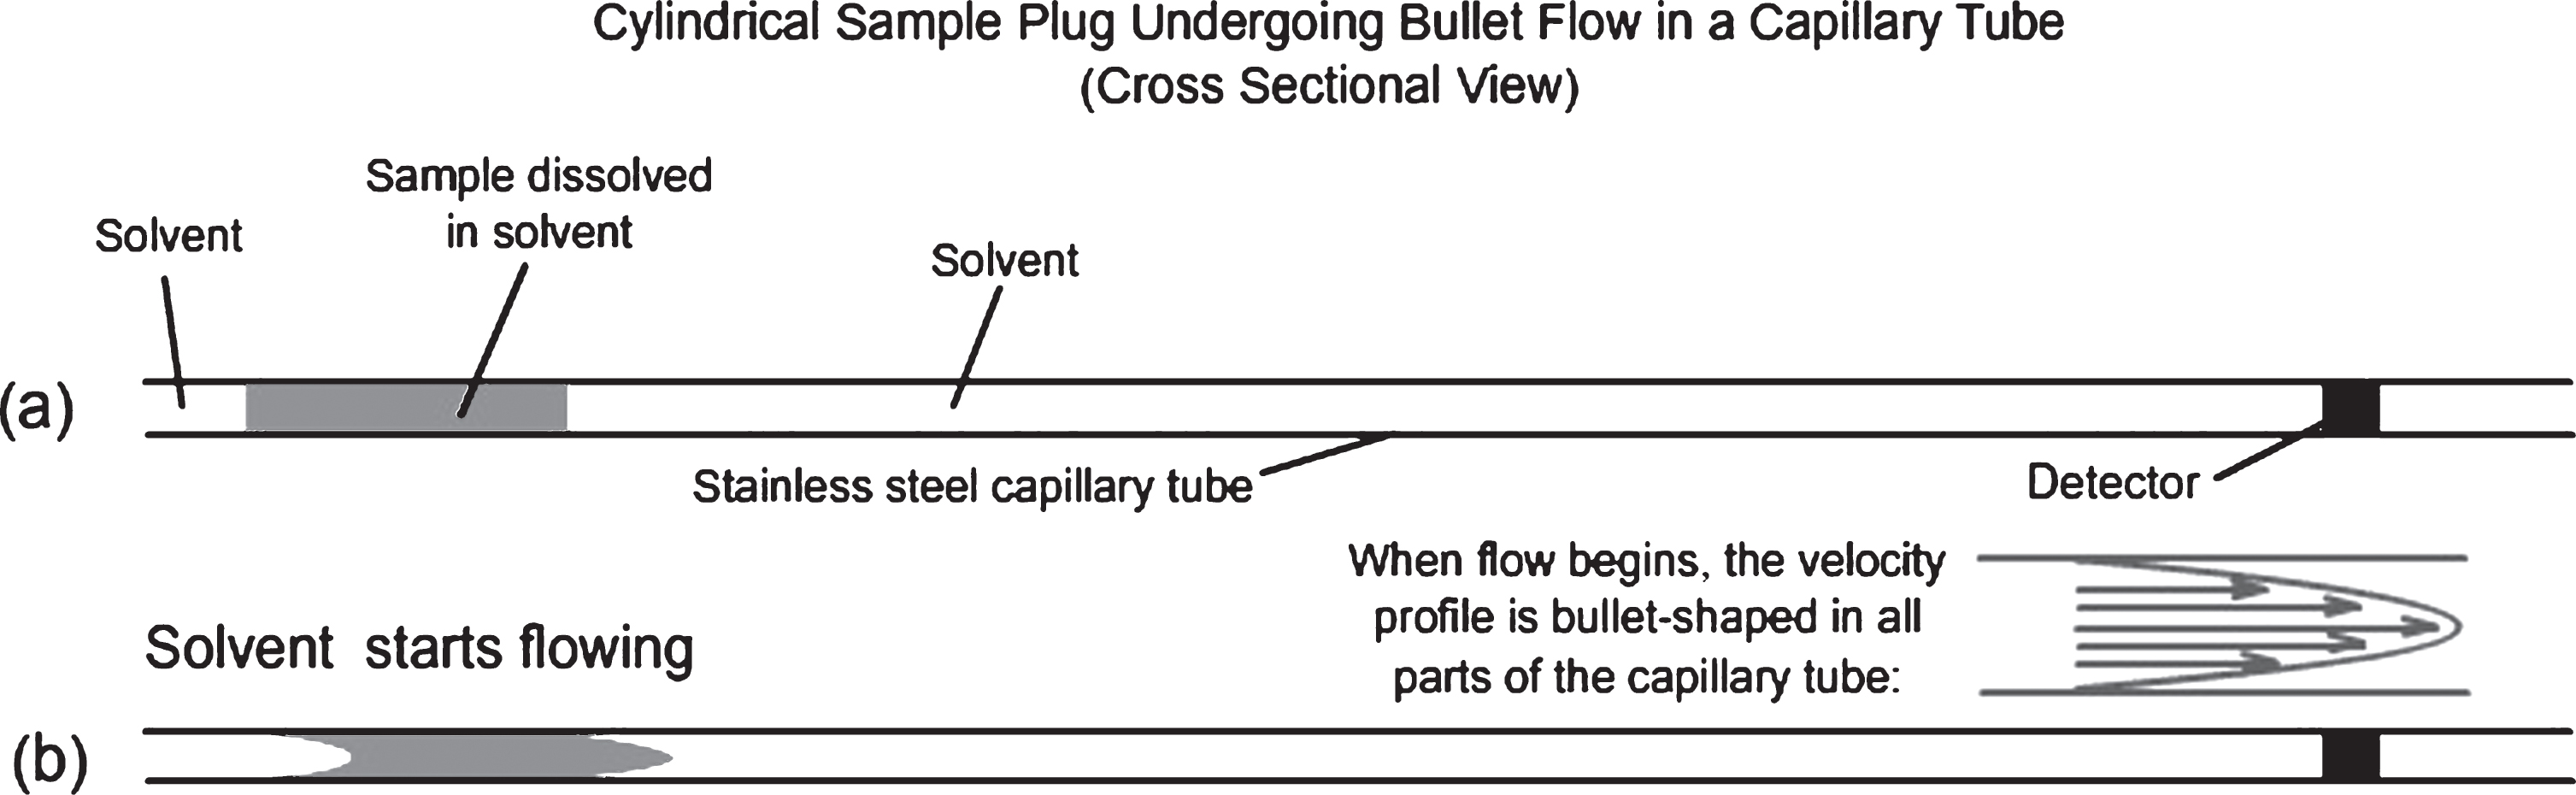 Sketches of the axial cross section of the capillary tubing and injected sample.